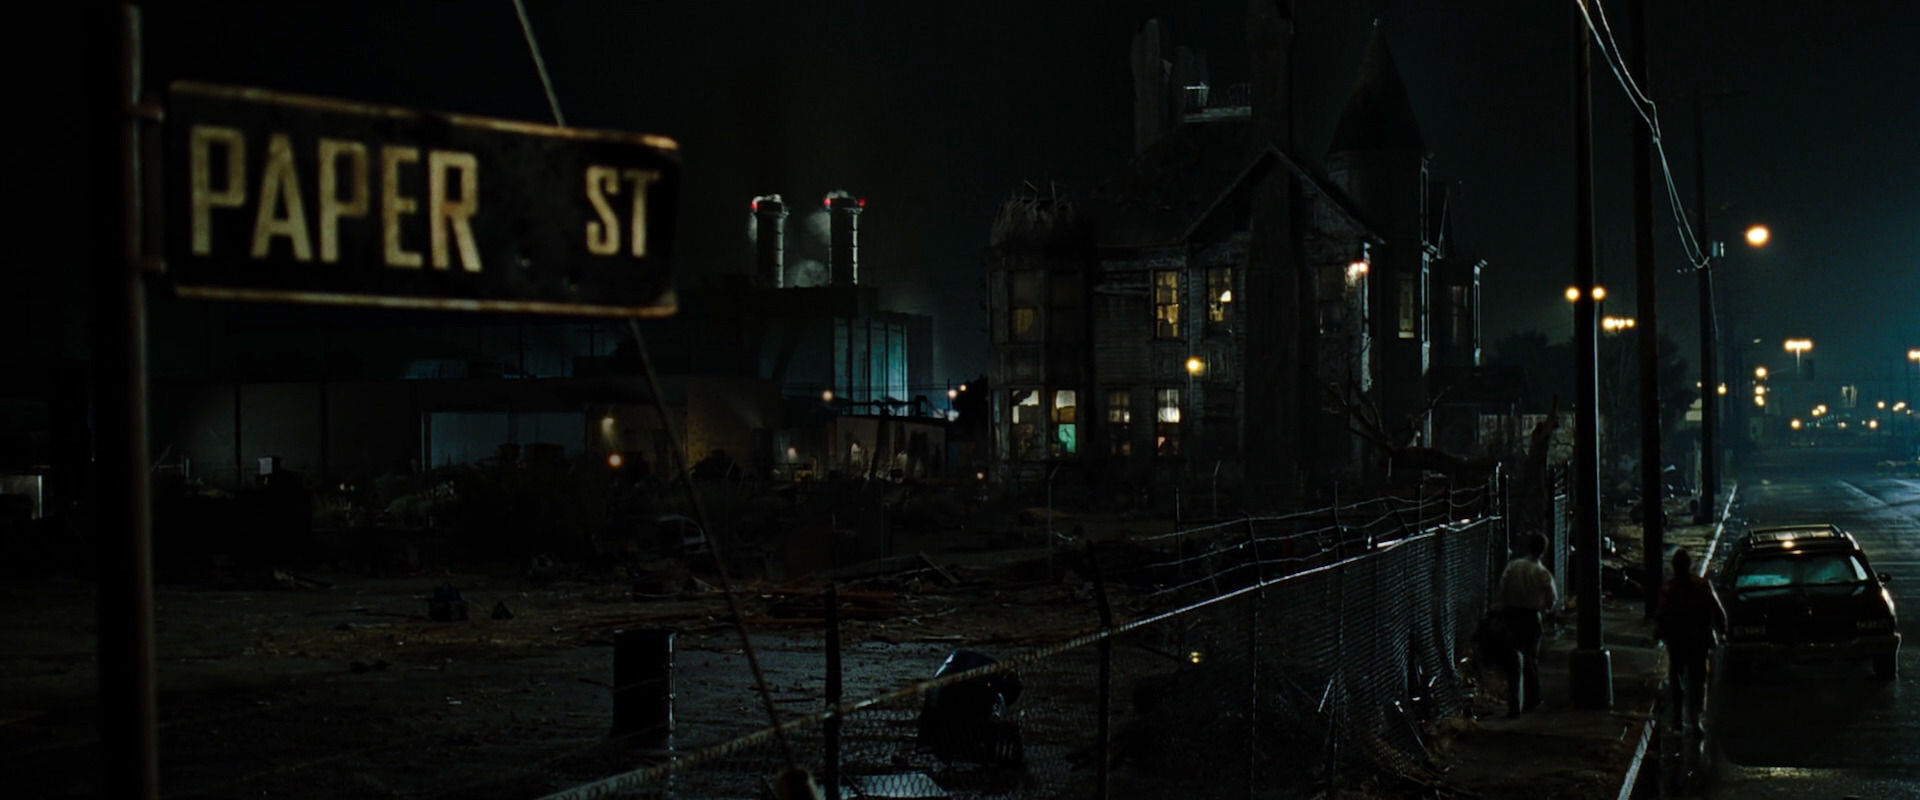 In Fight Club, Tyler Durden lives on Paper Street. A “paper street” is defined as a road or street that appears on maps but does not exist in reality.